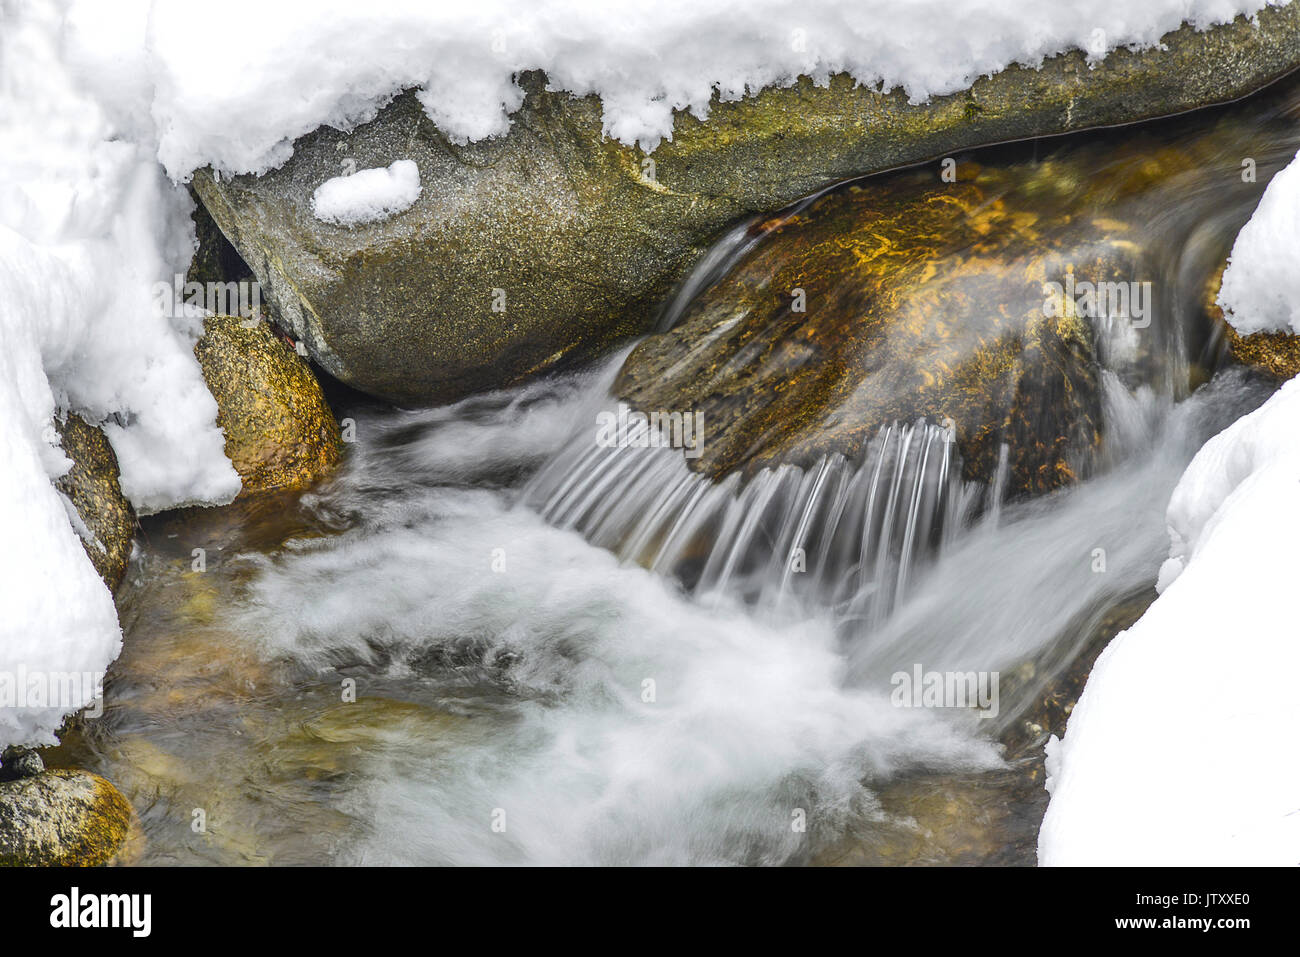 Close up view of winter on the Barreau river near Py, in Occitanie, France. Slow exposure of running water. Stock Photo